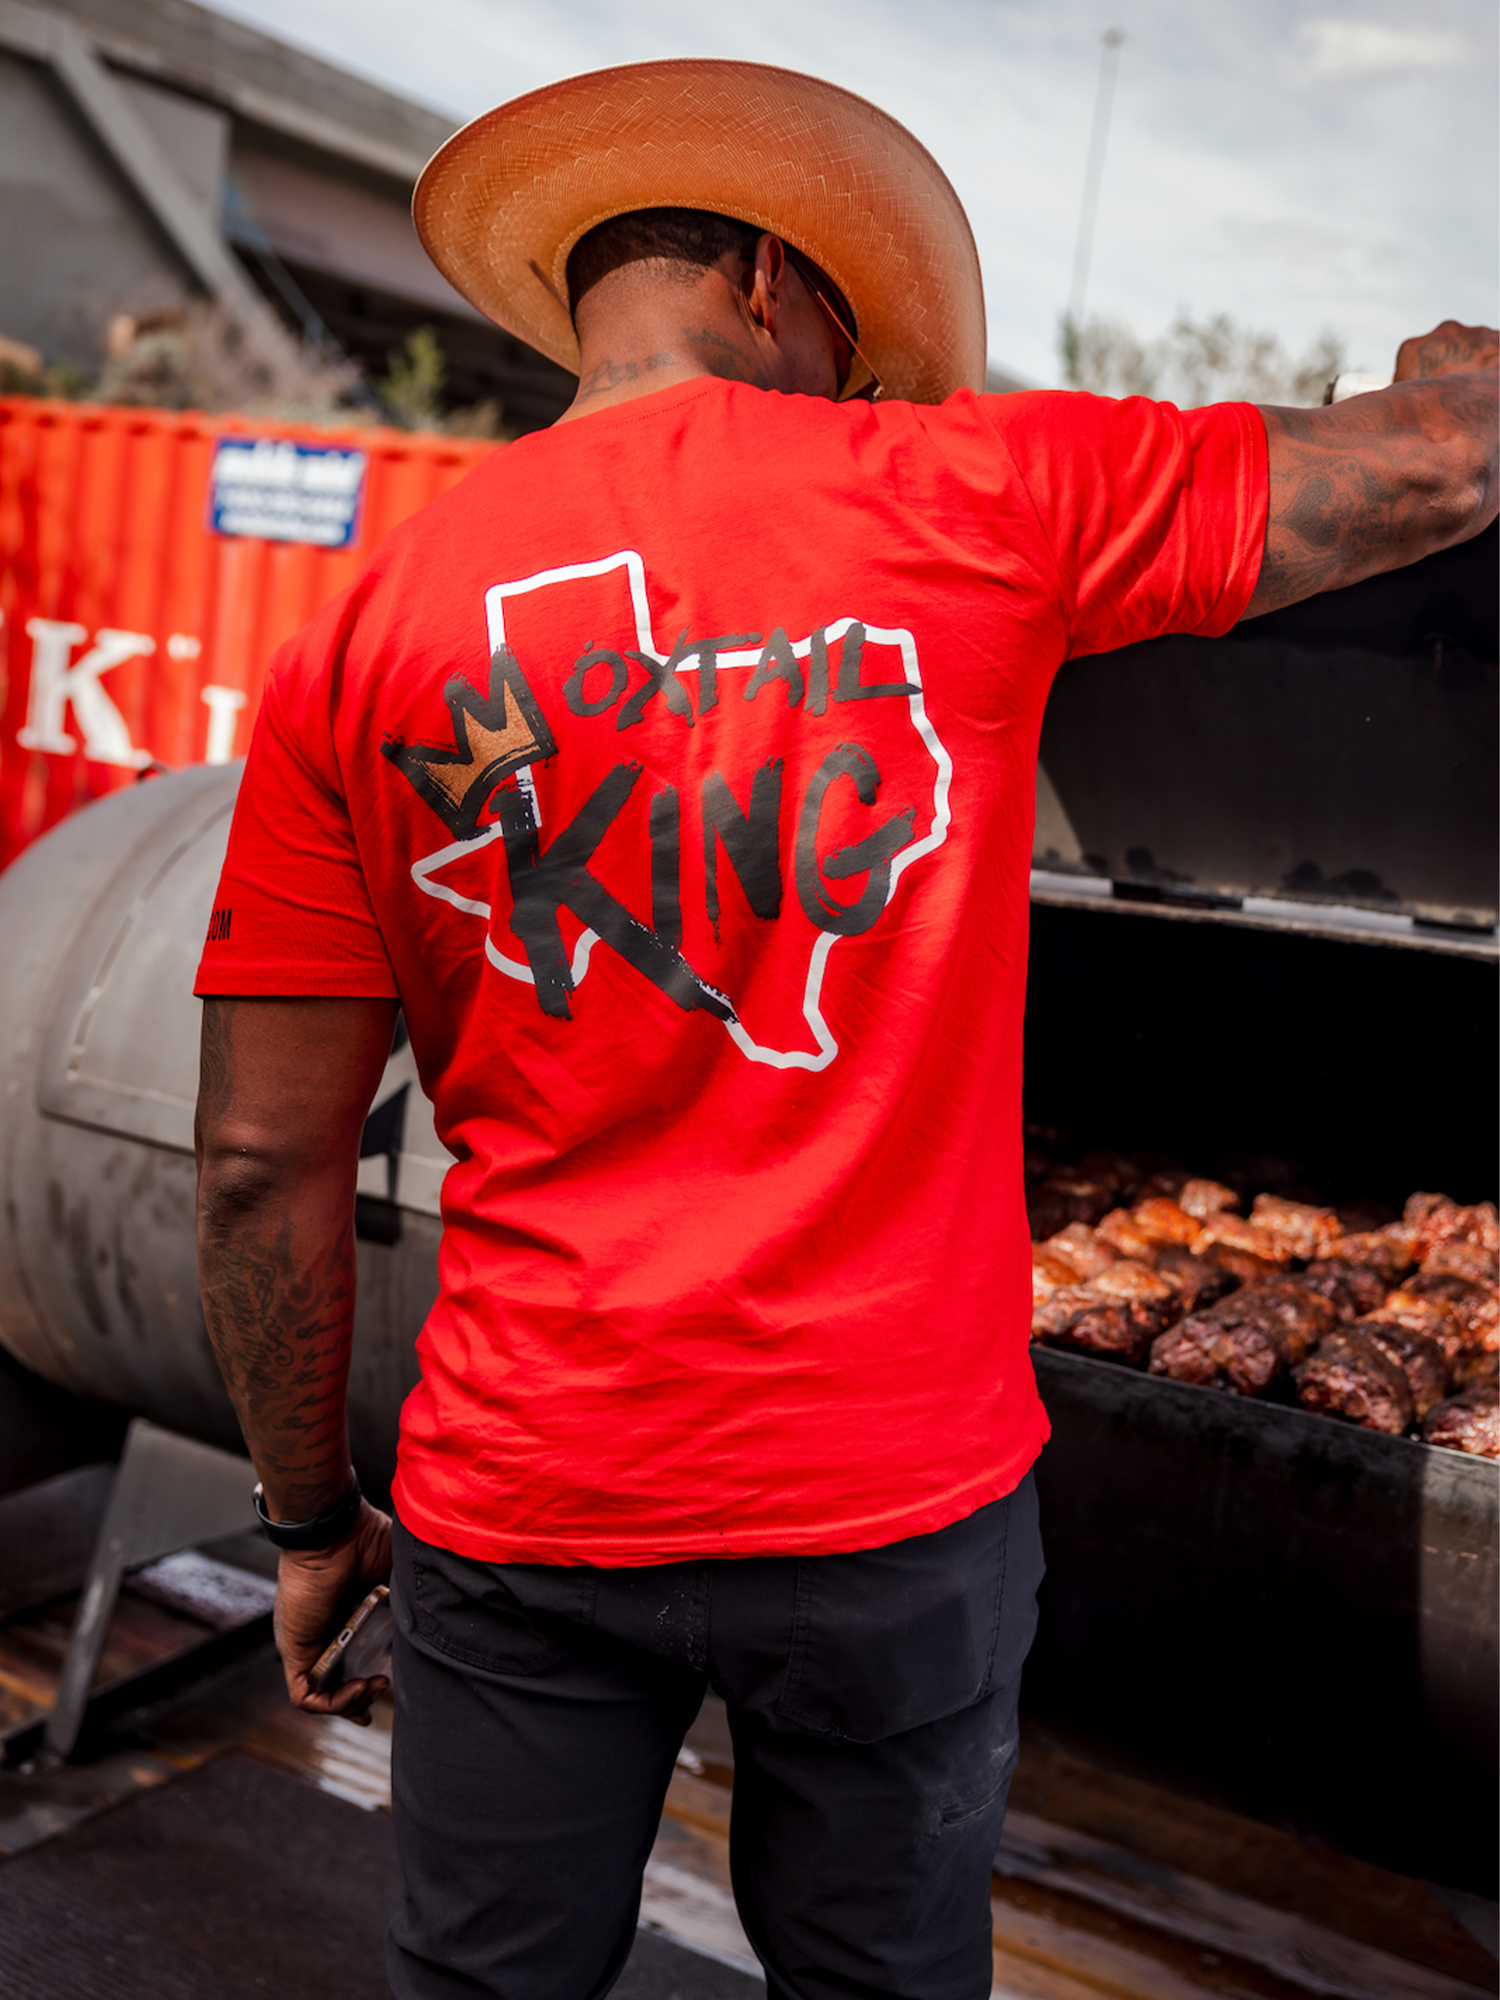 Limited Edition Drop | "The Oxtail King" Shirt